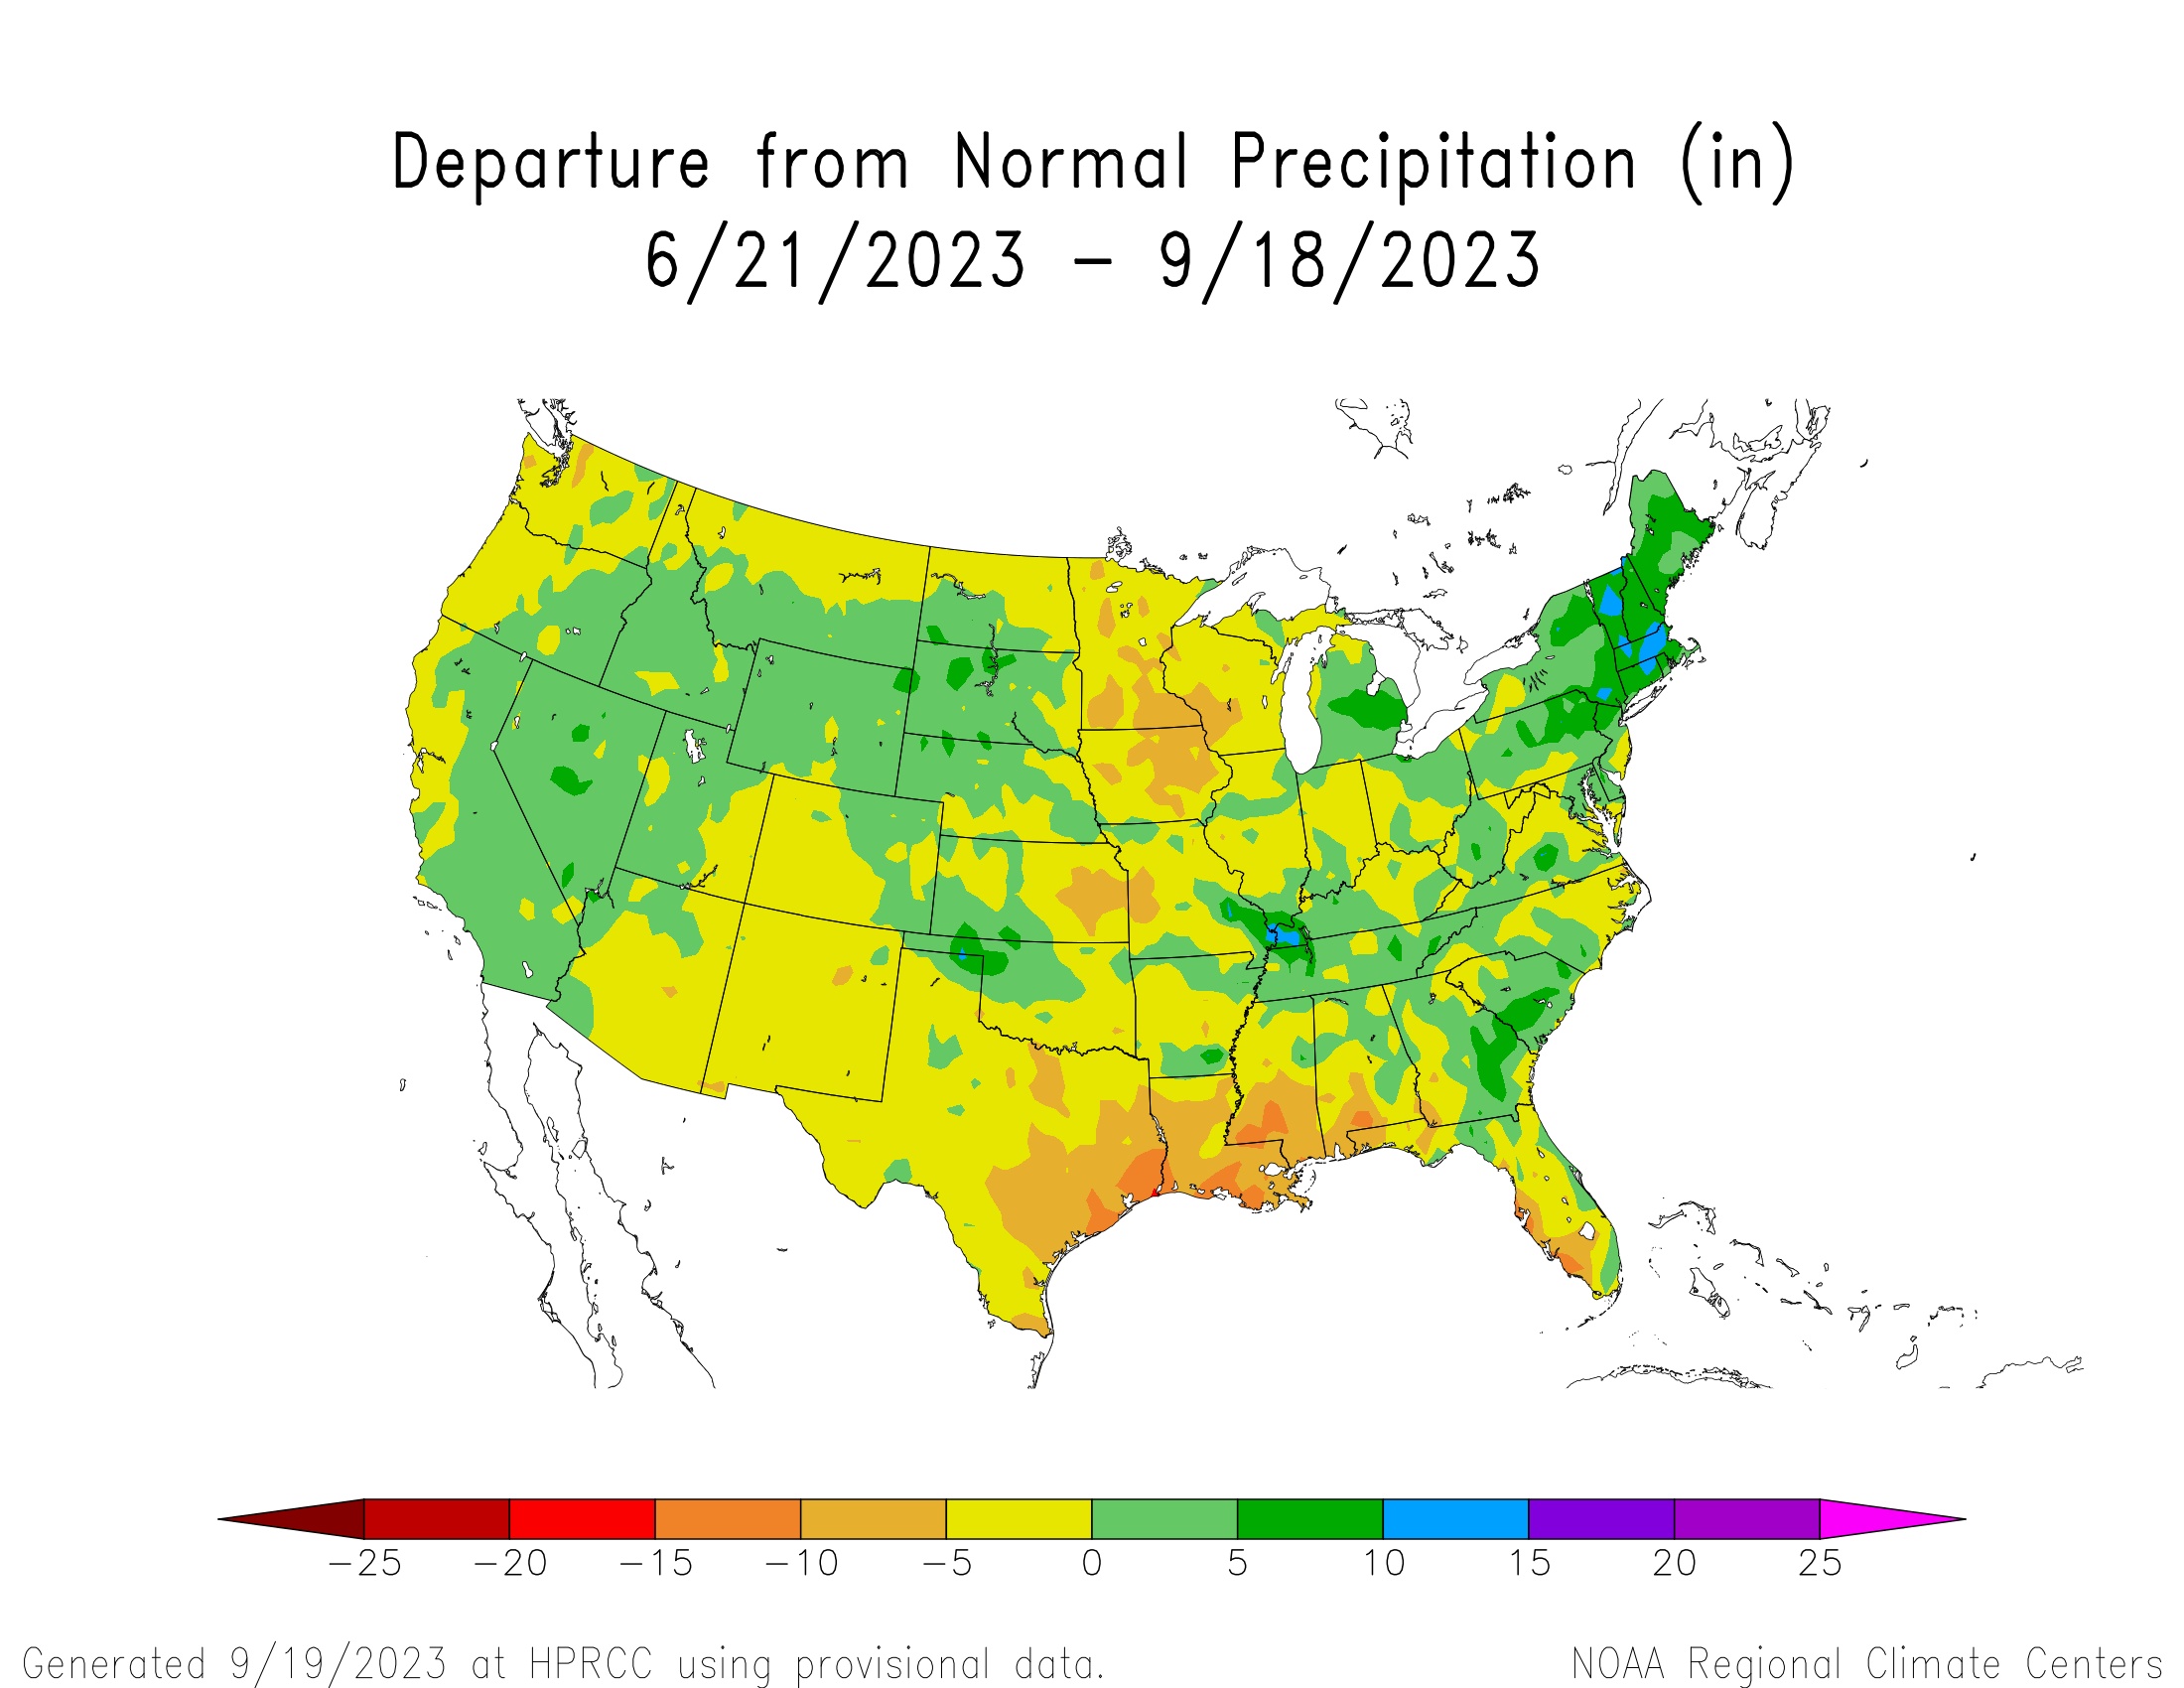 Departure from normal precipitation for the contiguous United States for June 27, 2023 to September 18, 2023.